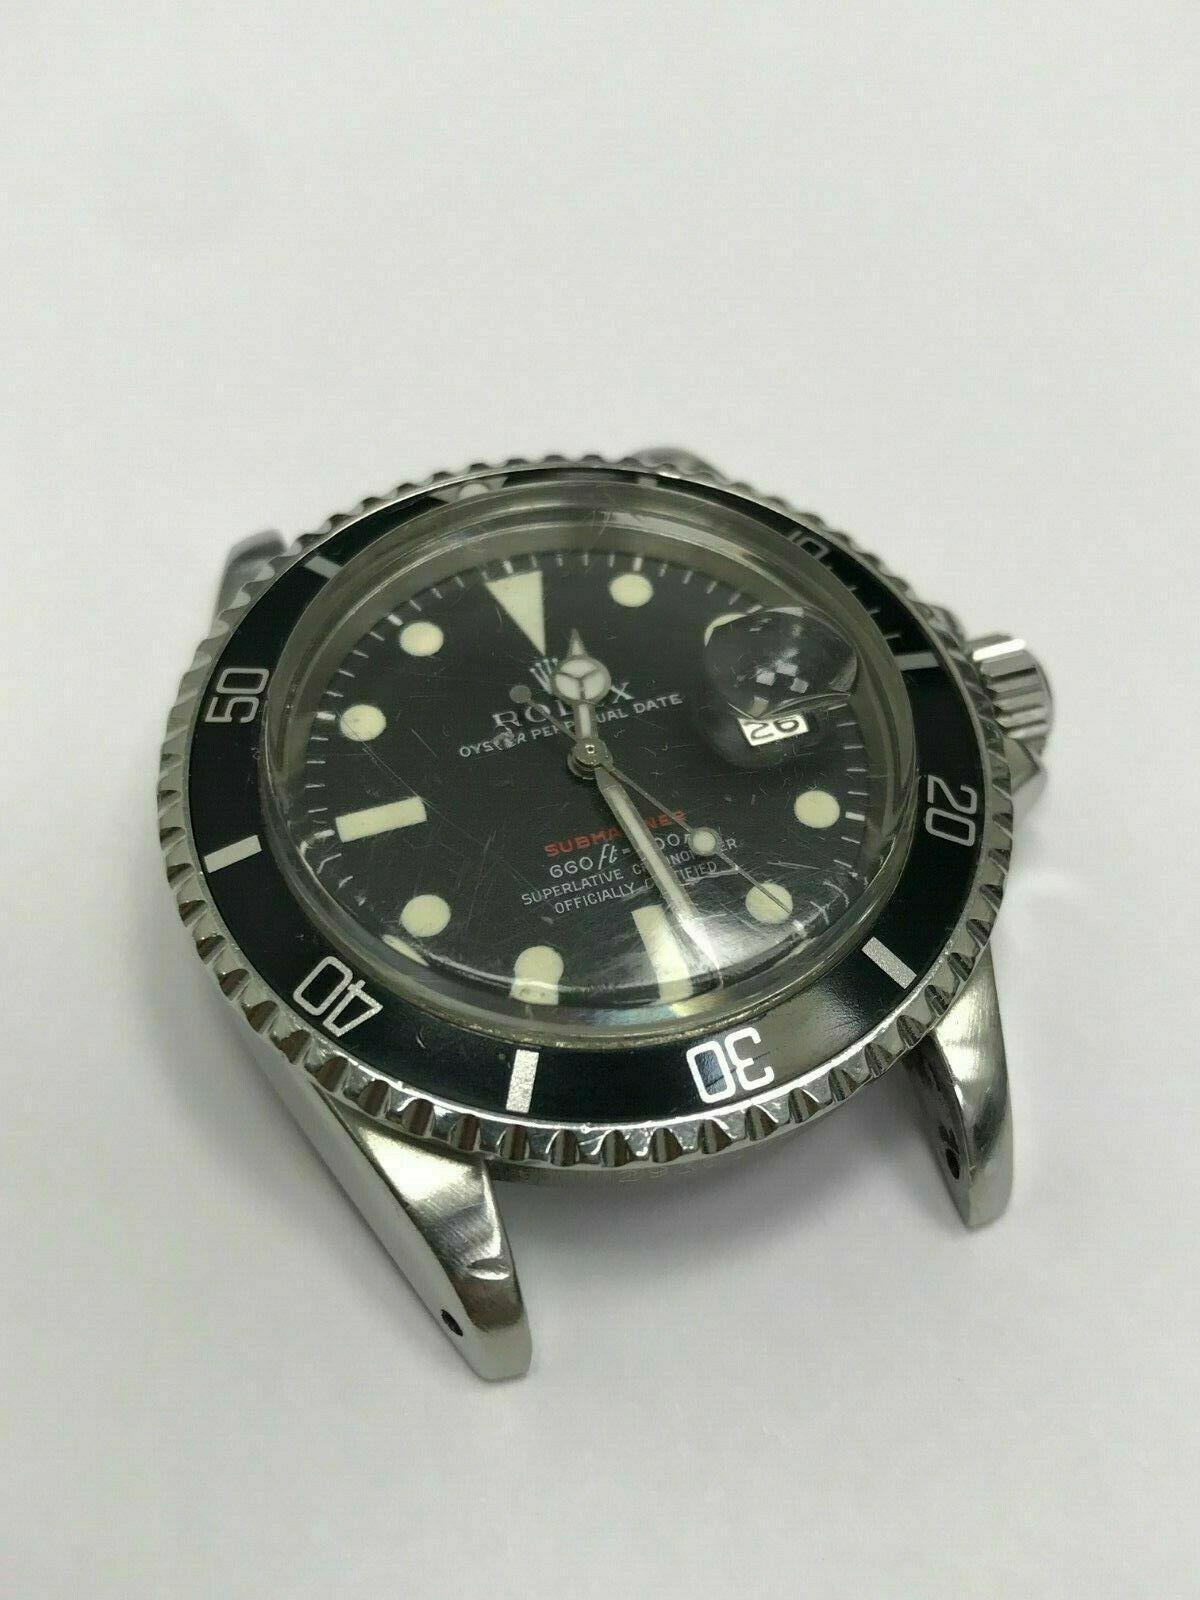 Vintage Red Rolex Submariner 1680 Original Dial Complete Box & Papers, 1970 In Fair Condition For Sale In San Diego, CA